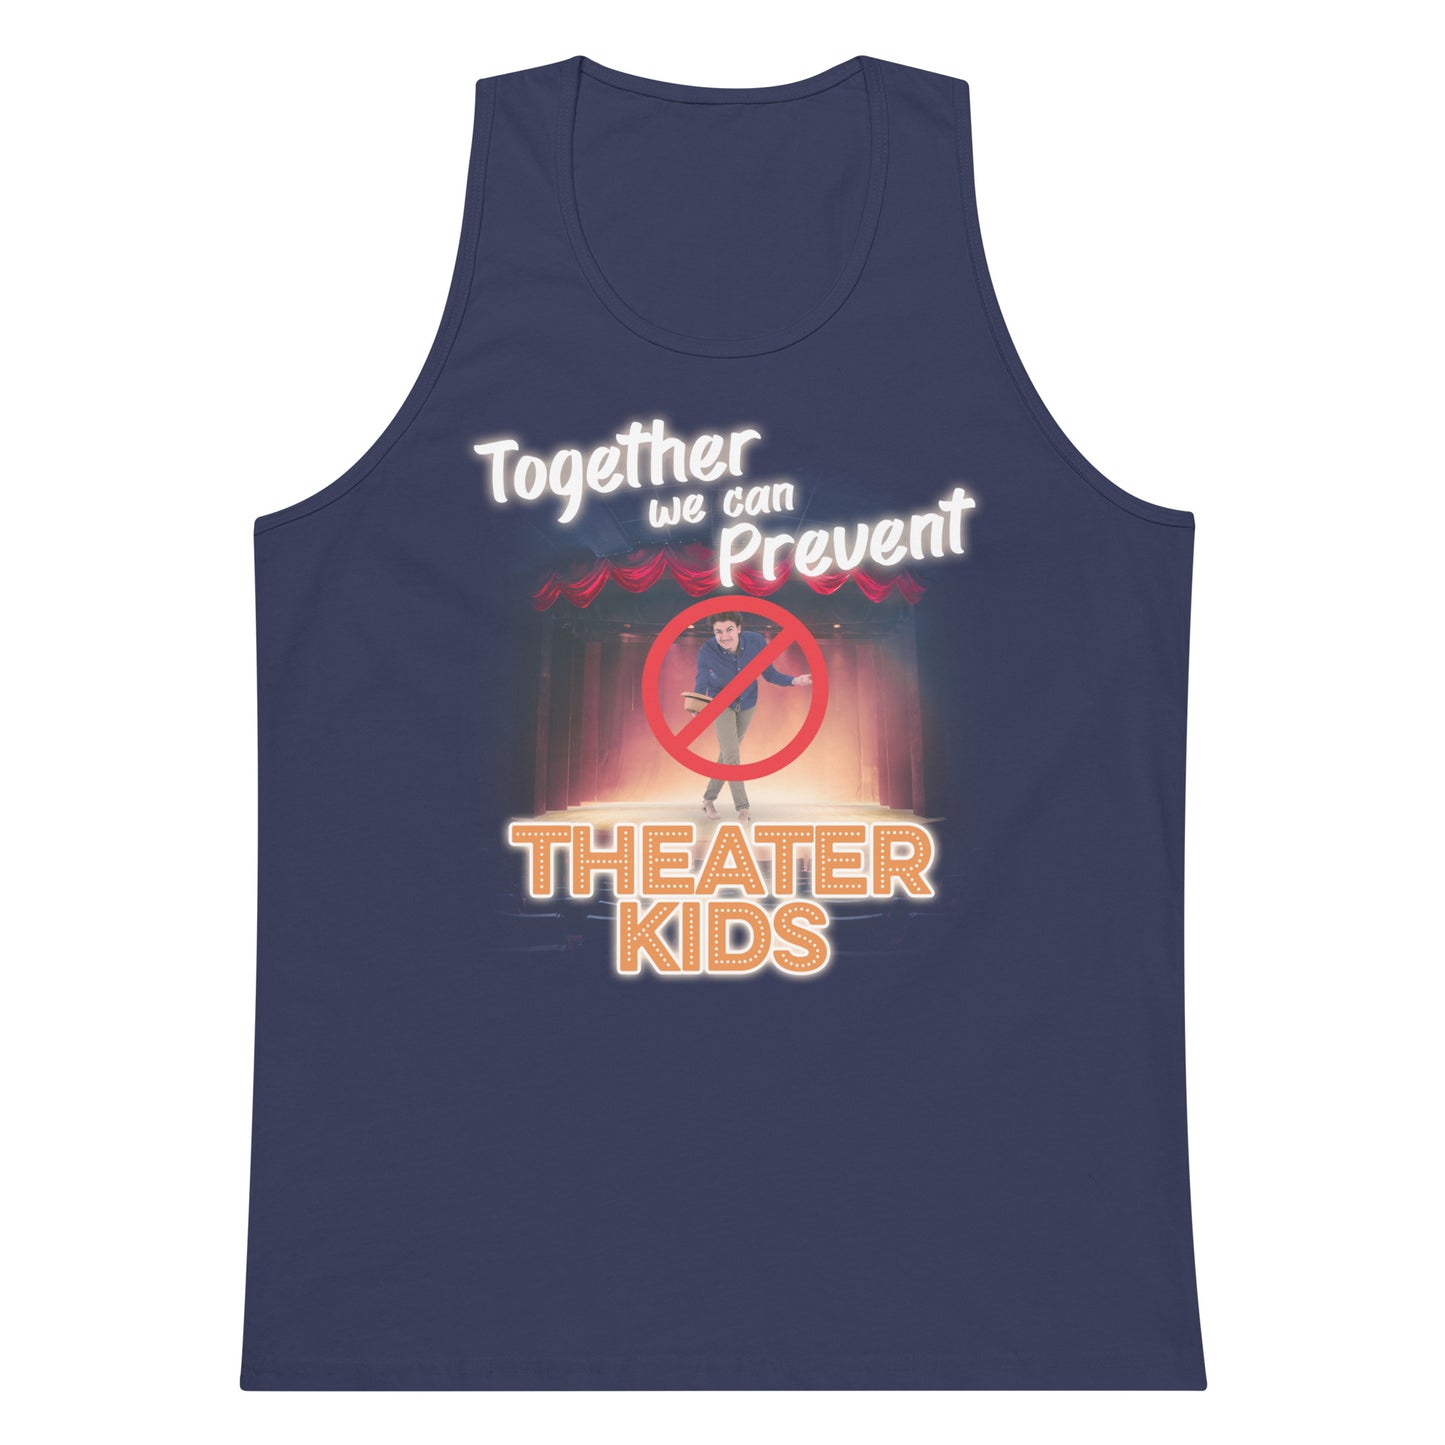 Together We Can Prevent Theater Kids tank top